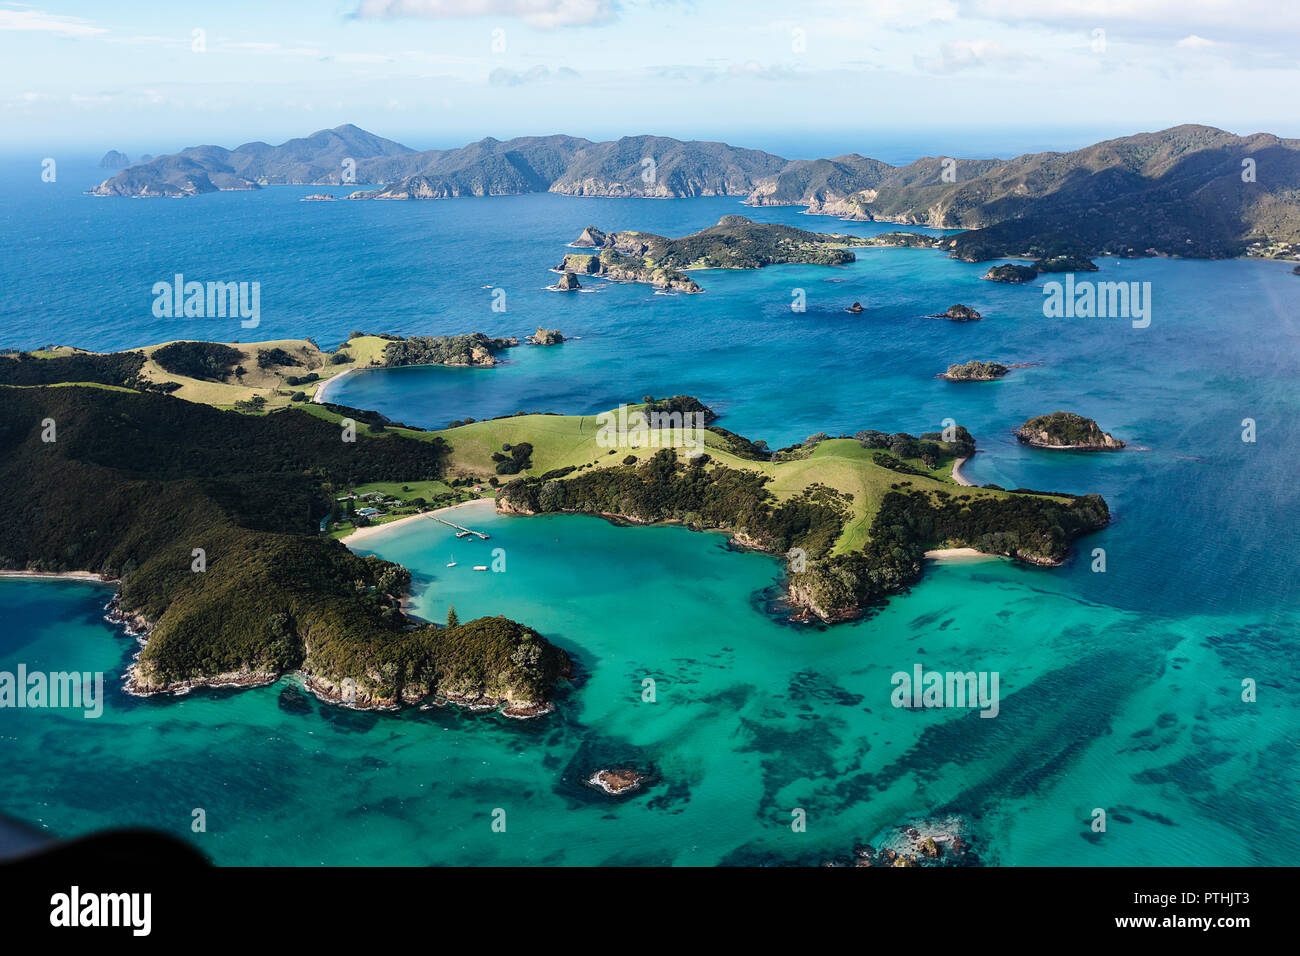 Scenic view Bay of Islands, North Island, New Zealand Stock Photo